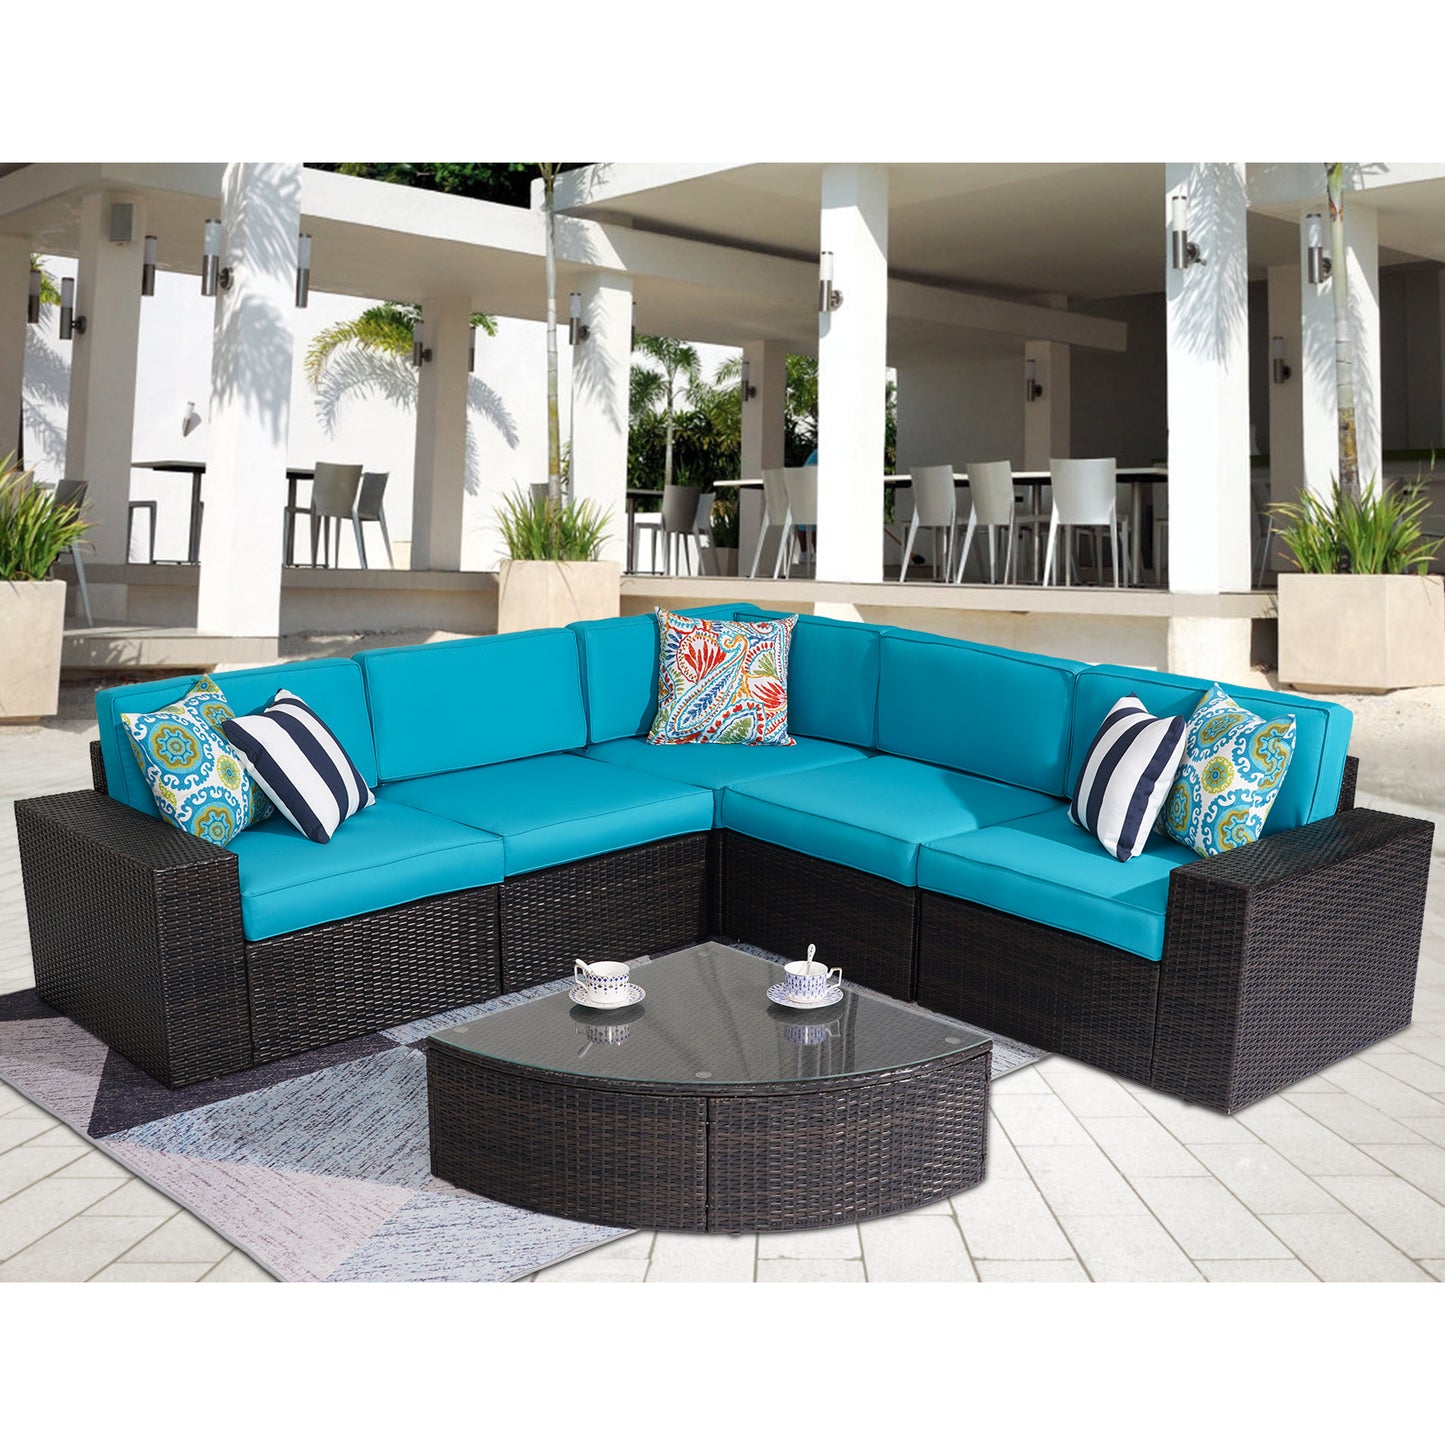 Outdoor Patio Furniture Sets, 6-Piece Patio Sectional Furniture Set, All-Weather Rattan Wicker Patio Sofa Chair, Blue